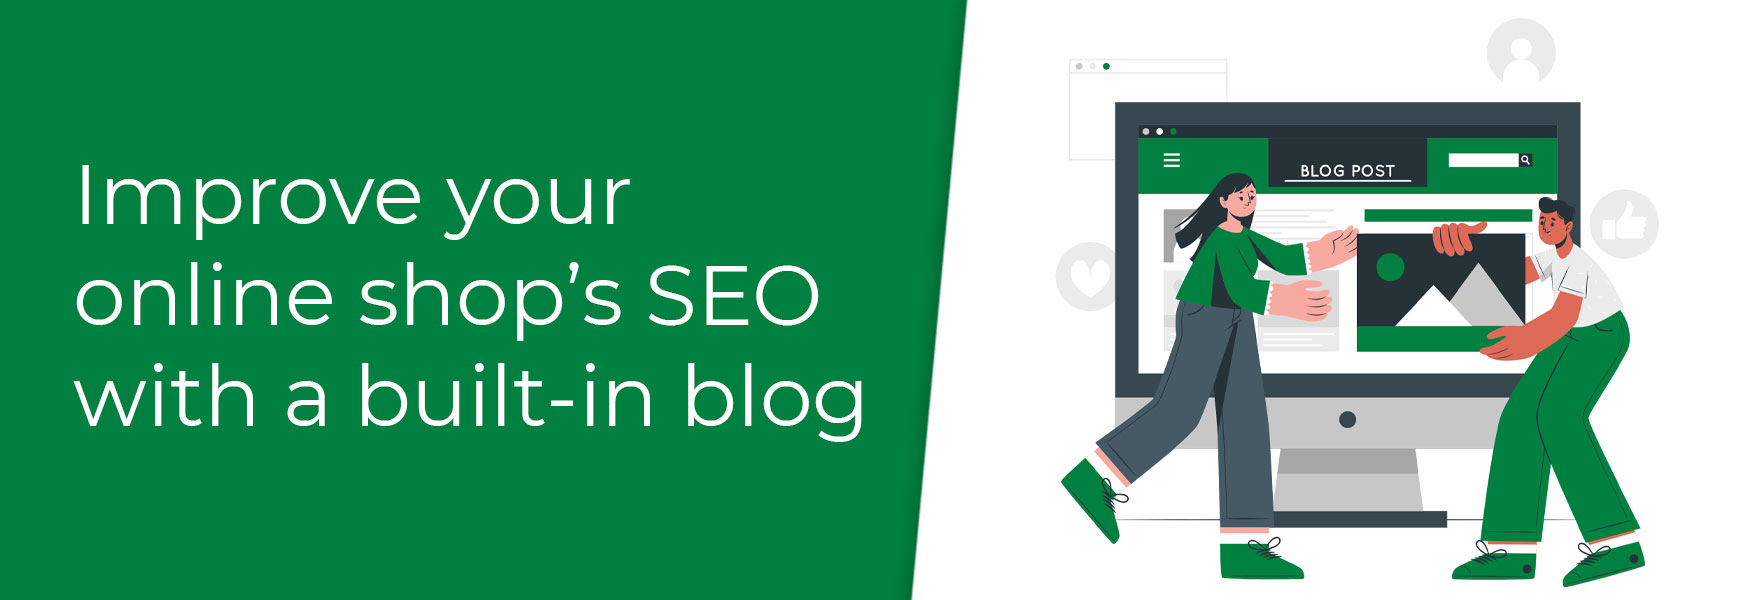 Improve your online shop's SEO with a blog